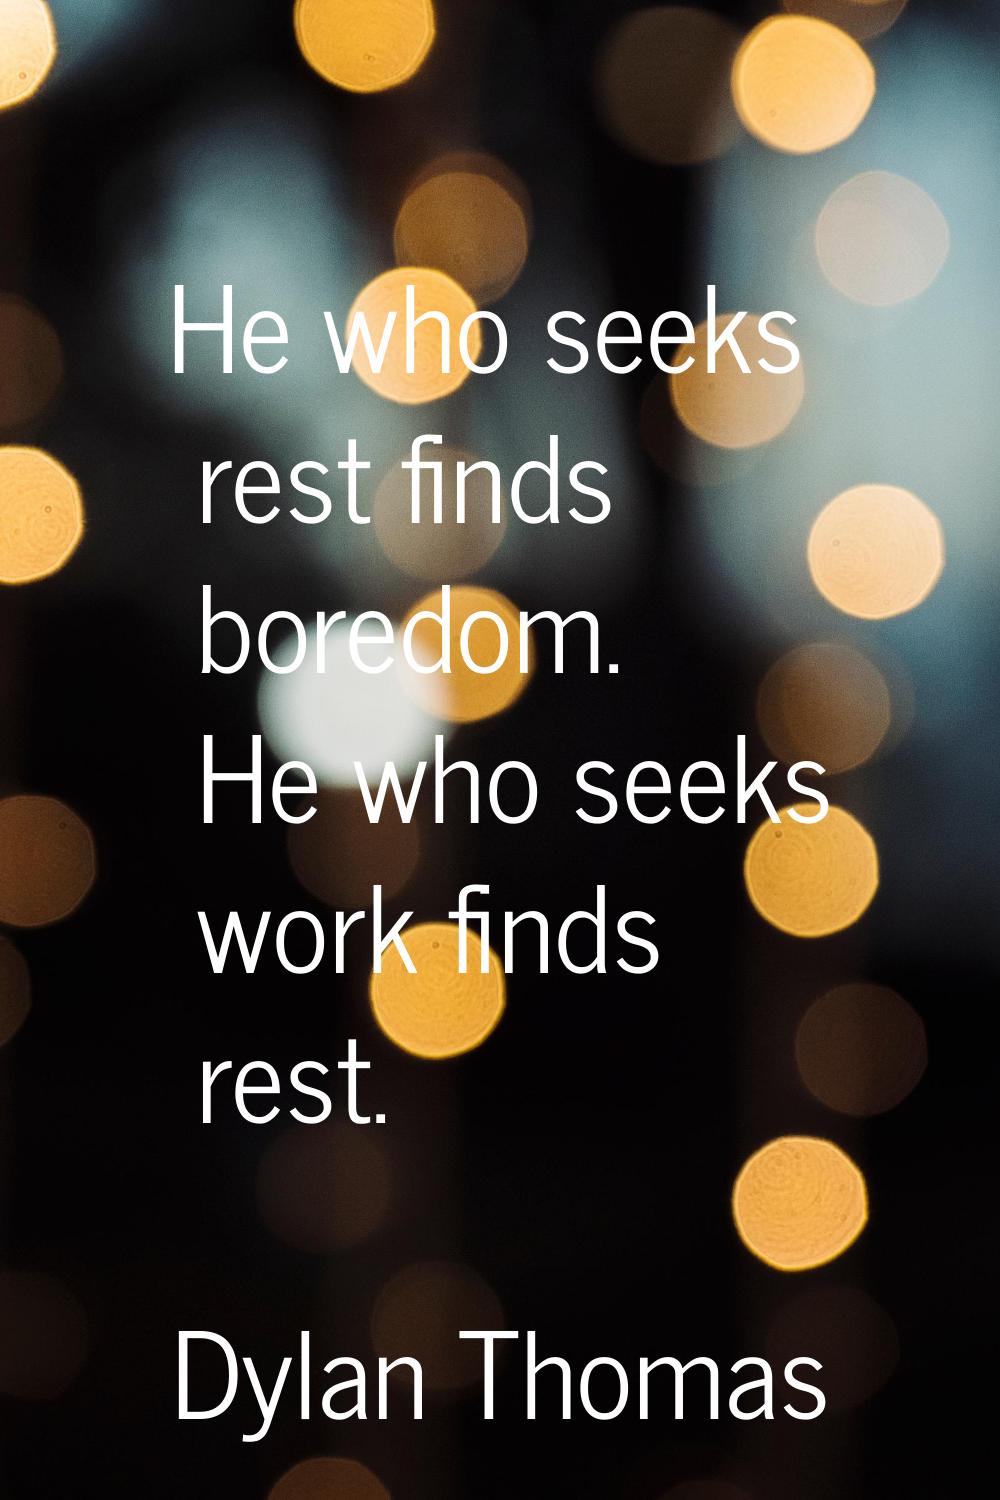 He who seeks rest finds boredom. He who seeks work finds rest.